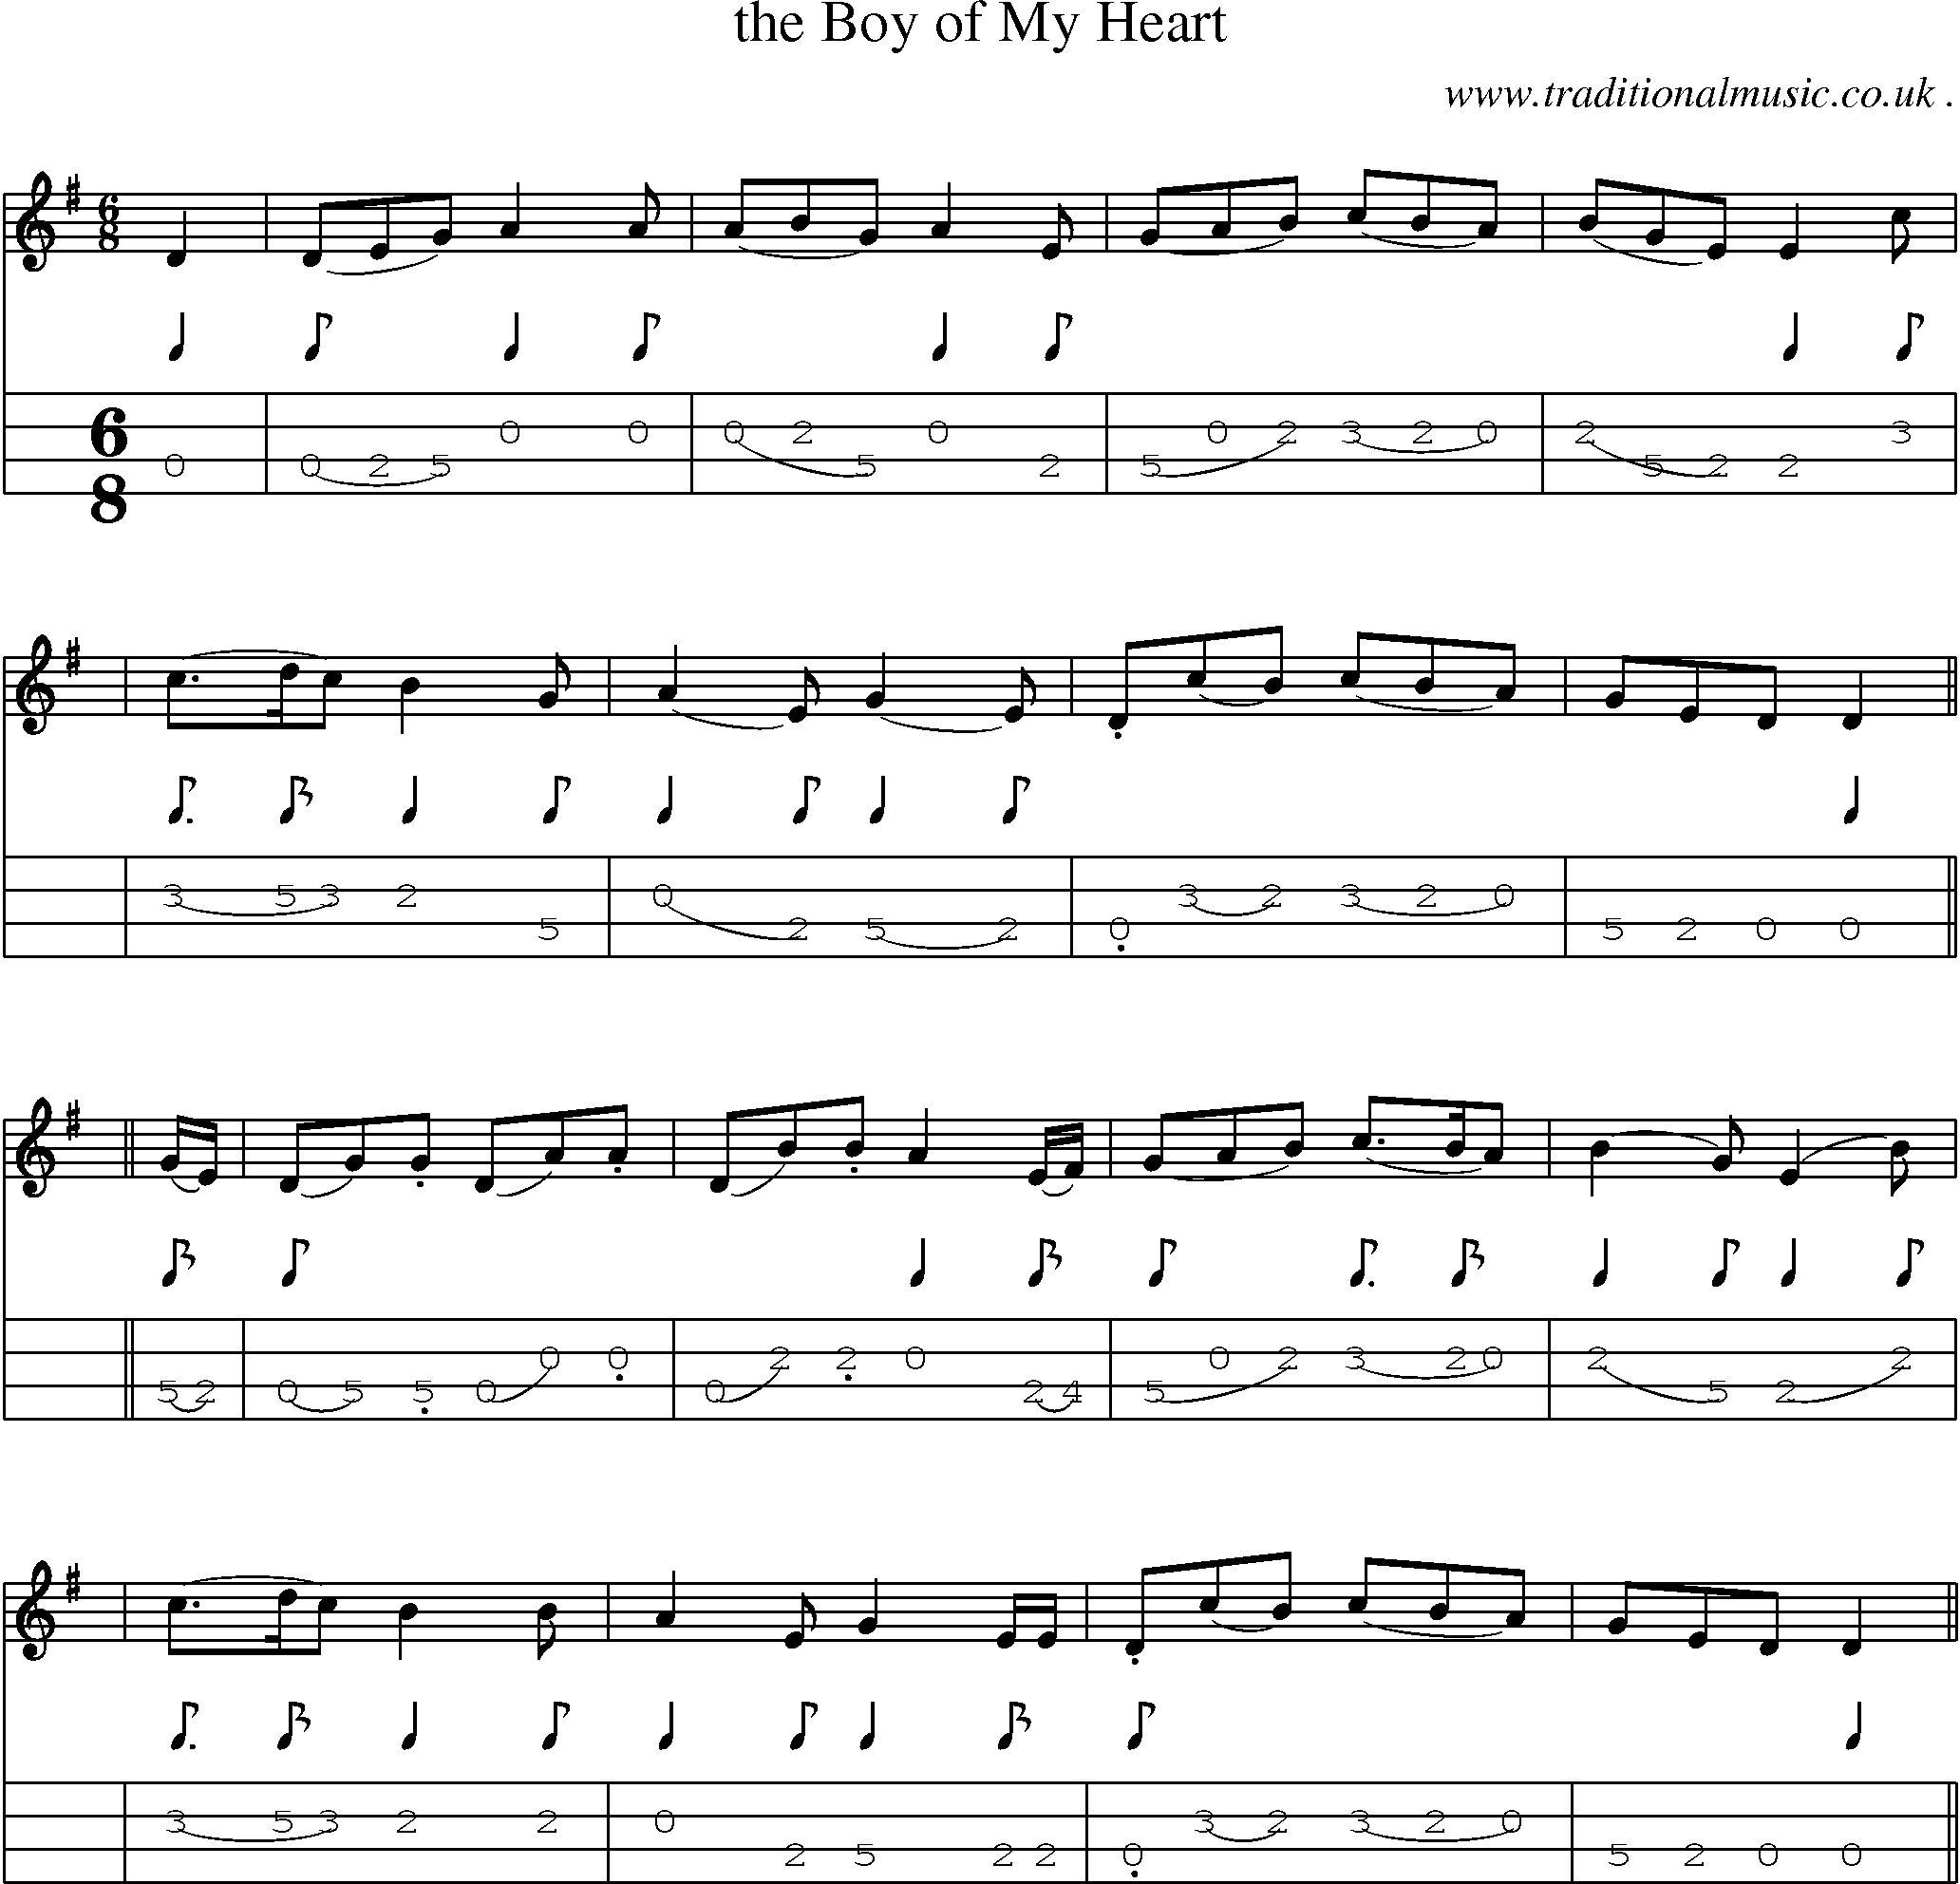 Sheet-music  score, Chords and Mandolin Tabs for The Boy Of My Heart